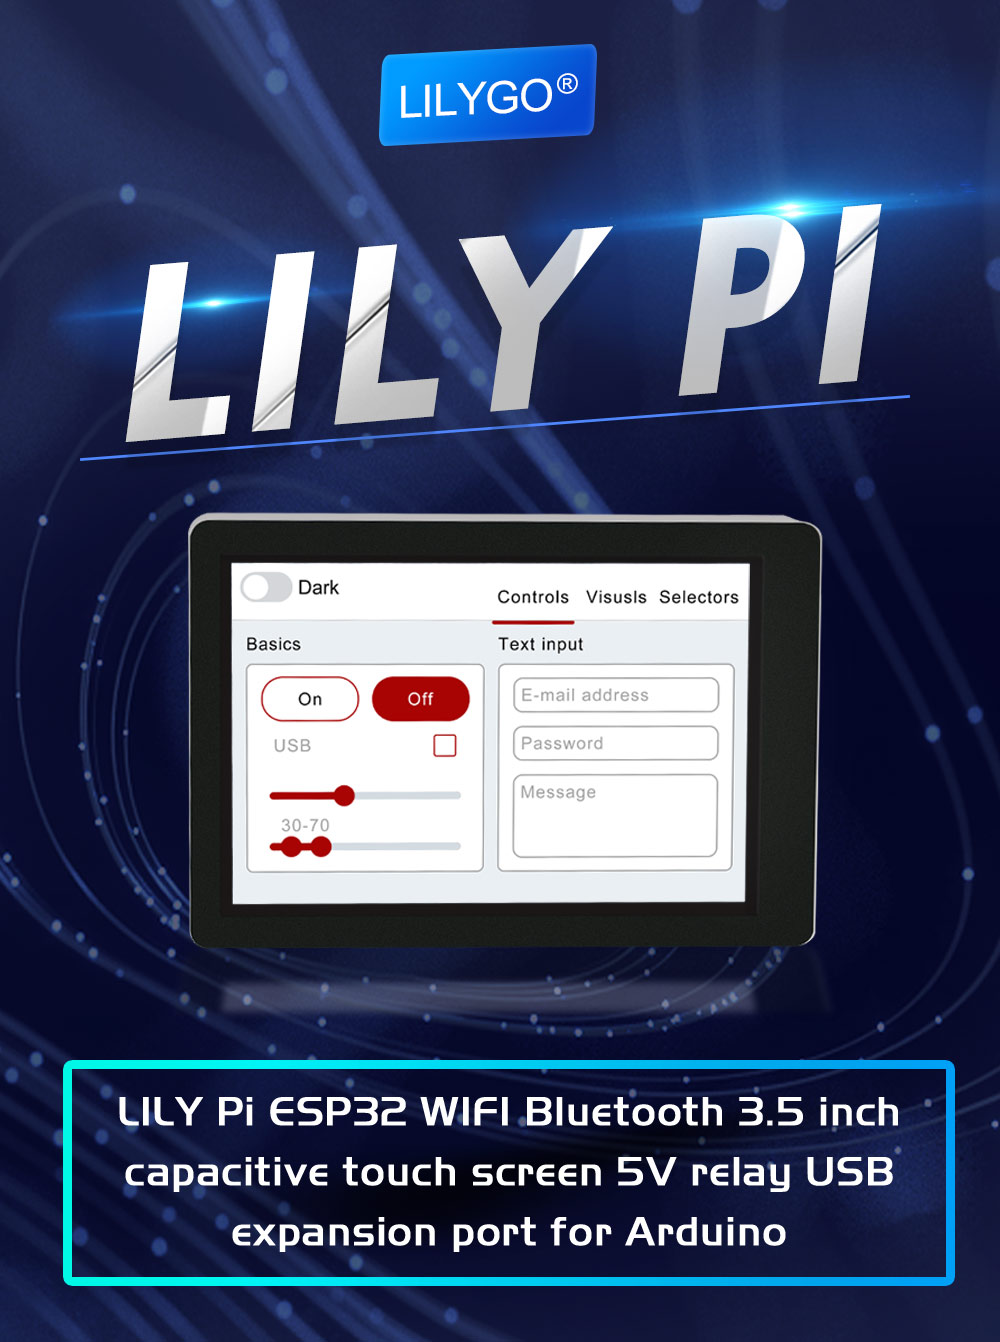 LILYGO® LILY Pi ESP32 WIFI Bluetooth 3.5 inch capacitive touch screen 5V relay USB expansion port for Arduino